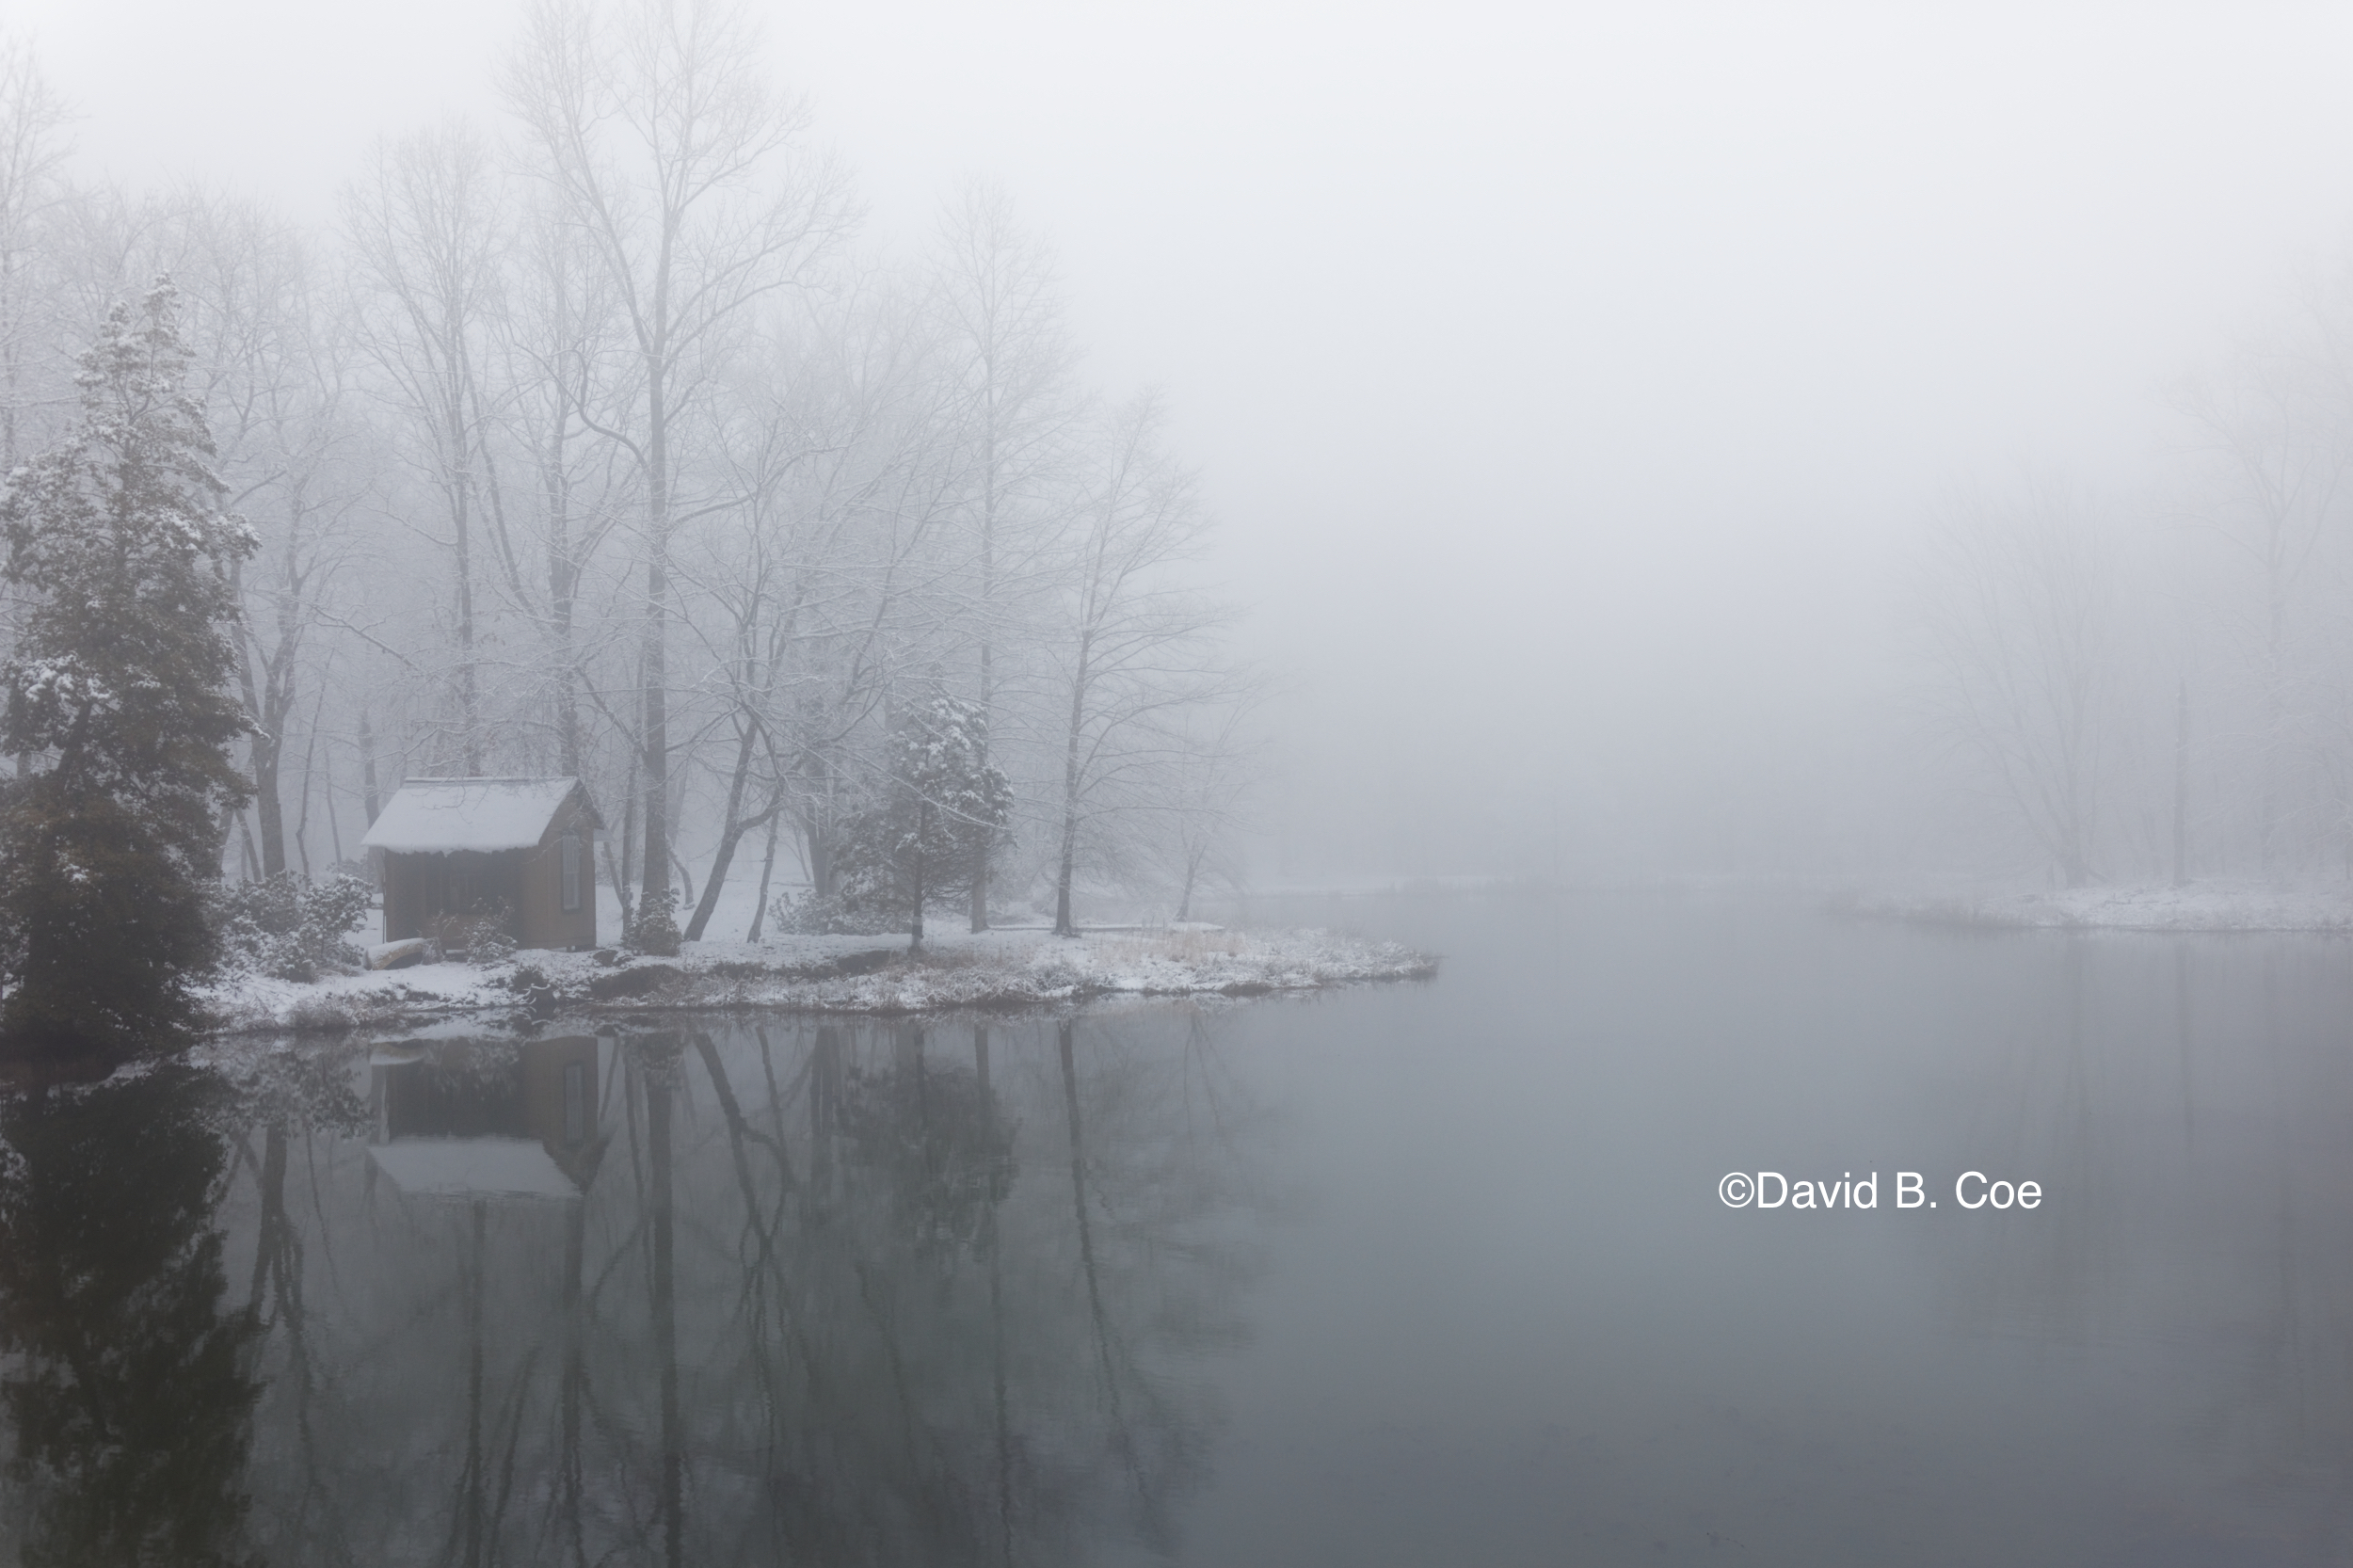 Mist and Snow Reflections, by David B. Coe